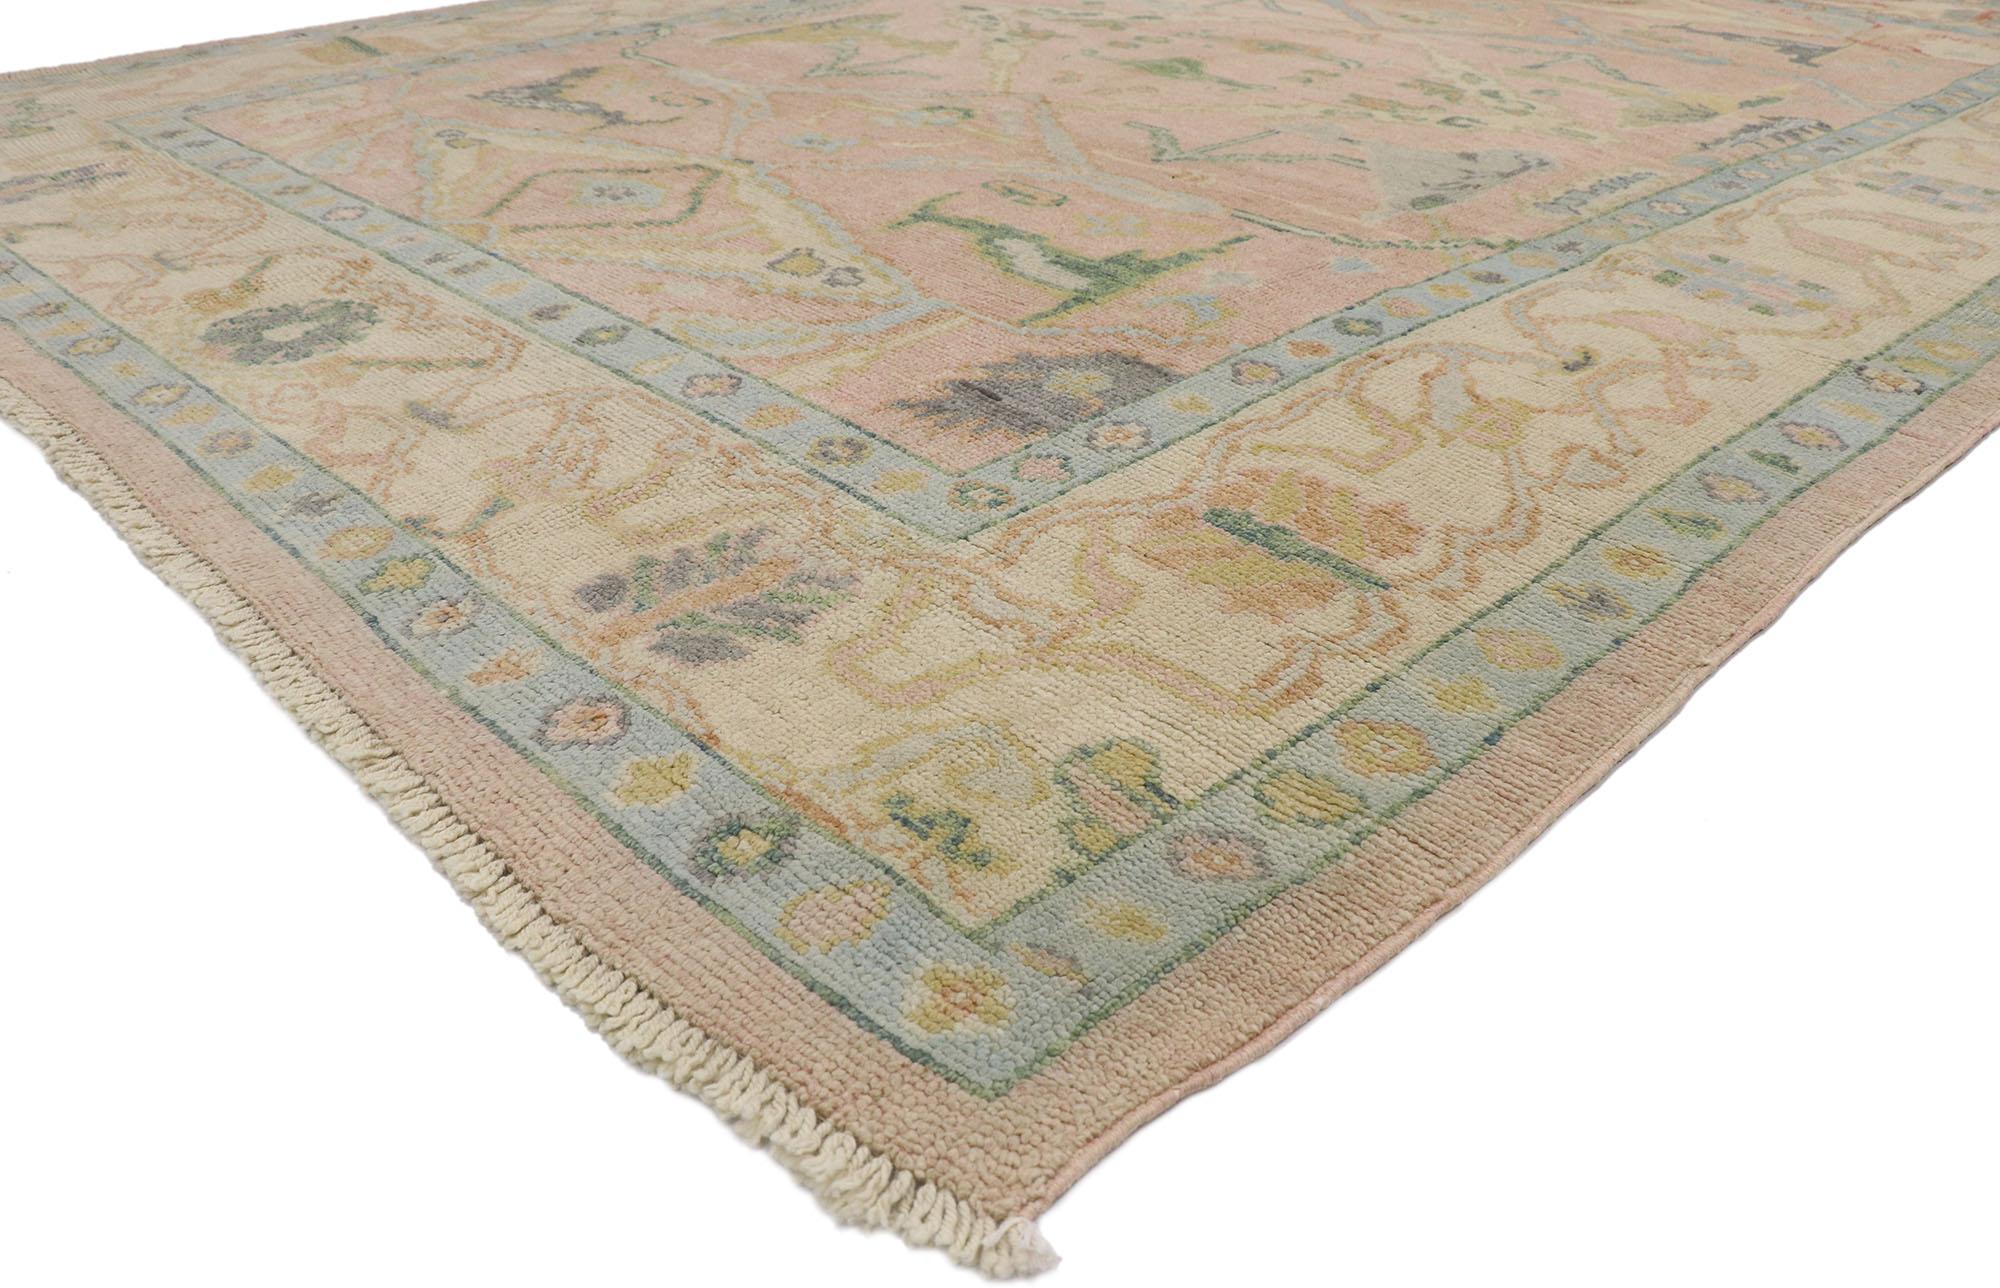 80671 new Contemporary Pakistani Oushak rug with Modern Georgian style 09'04 x 12'08. This hand-knotted wool contemporary Pakistani Oushak rug features an all-over botanical lattice pattern spread across an abrashed rose colored field. An array of